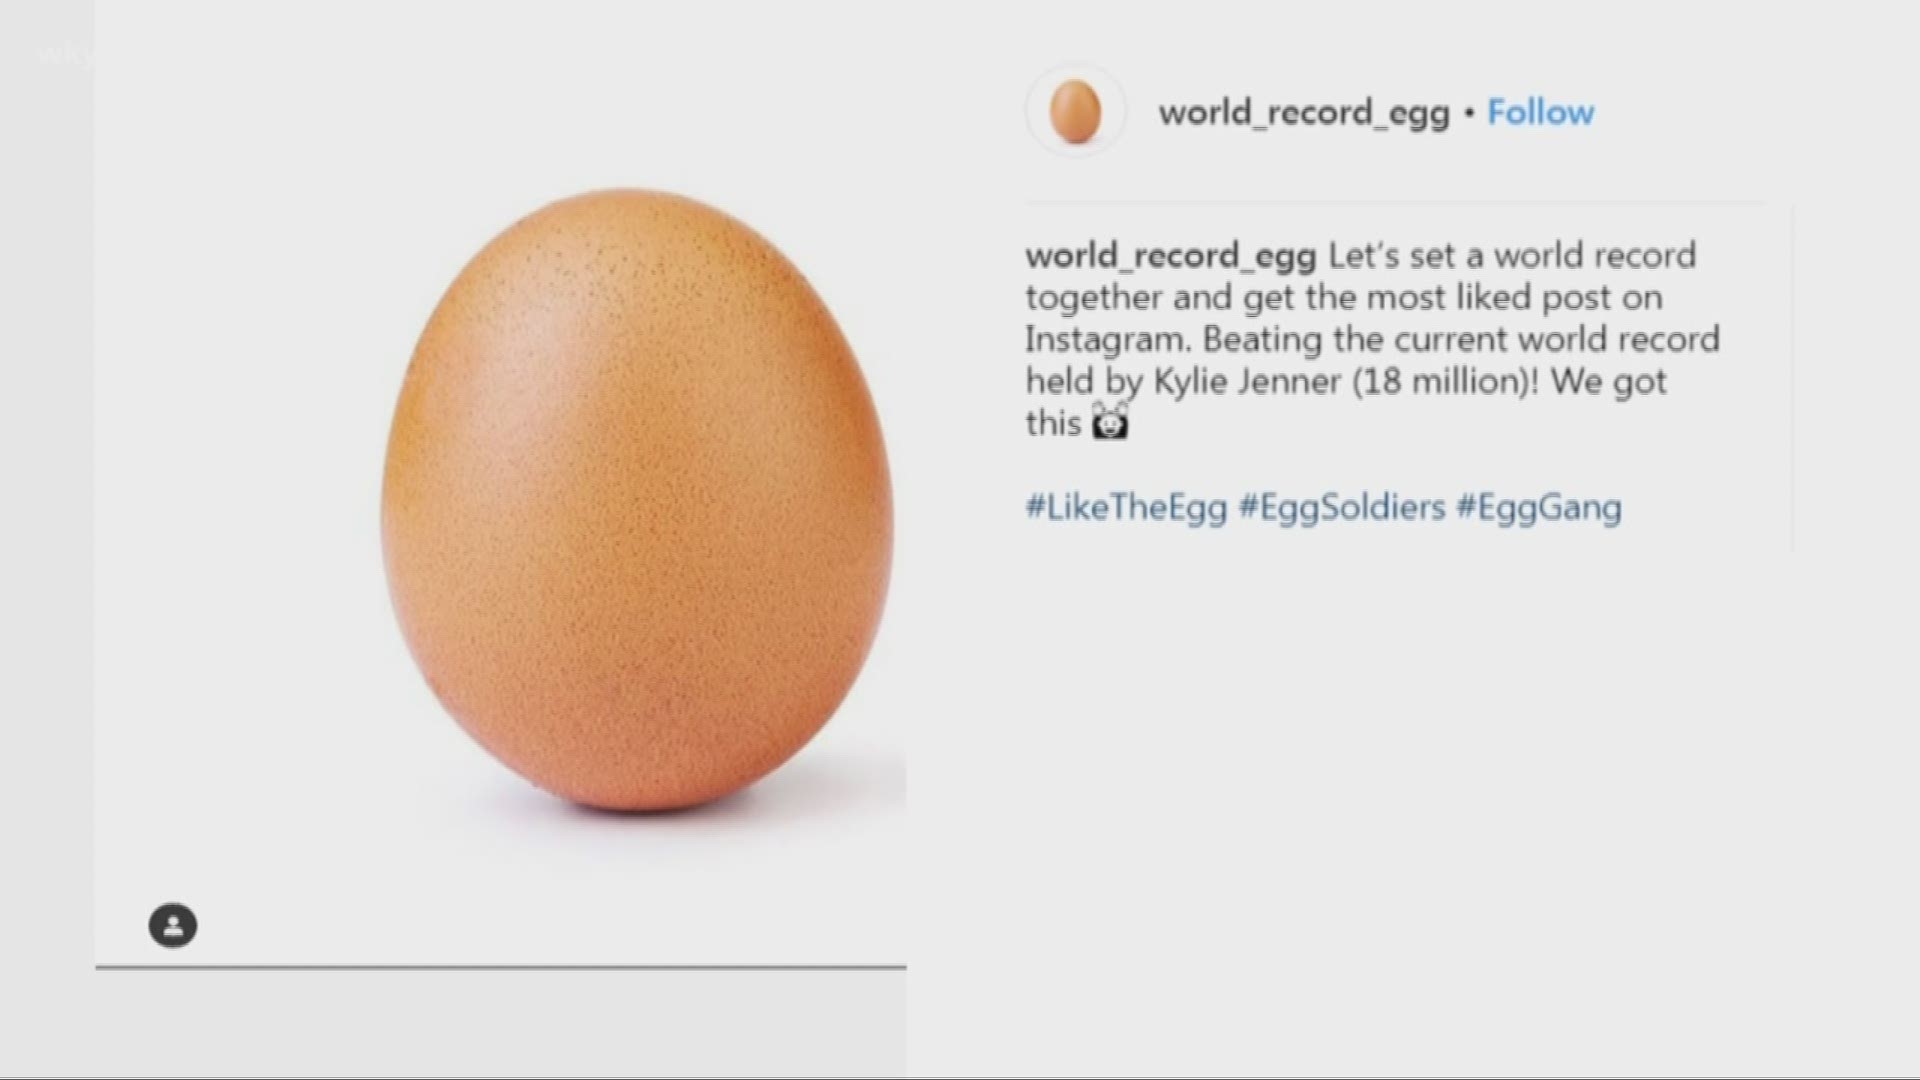 Jan. 14, 2019: Social media is losing its mind over an egg. Yes, an egg.